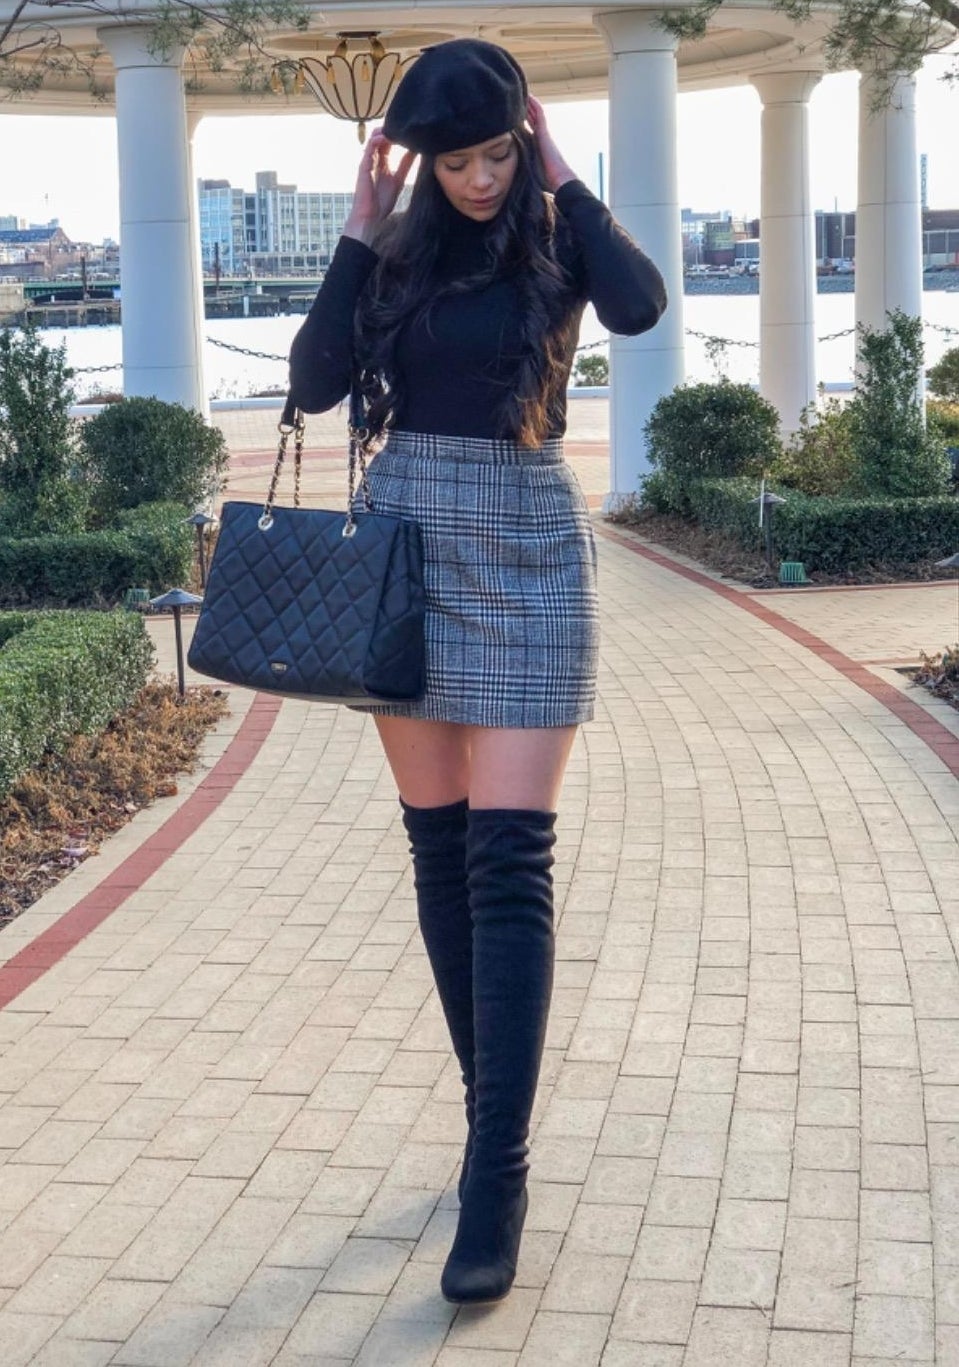 The skirt worn by an Amazon reviewer and paired with thigh high boots